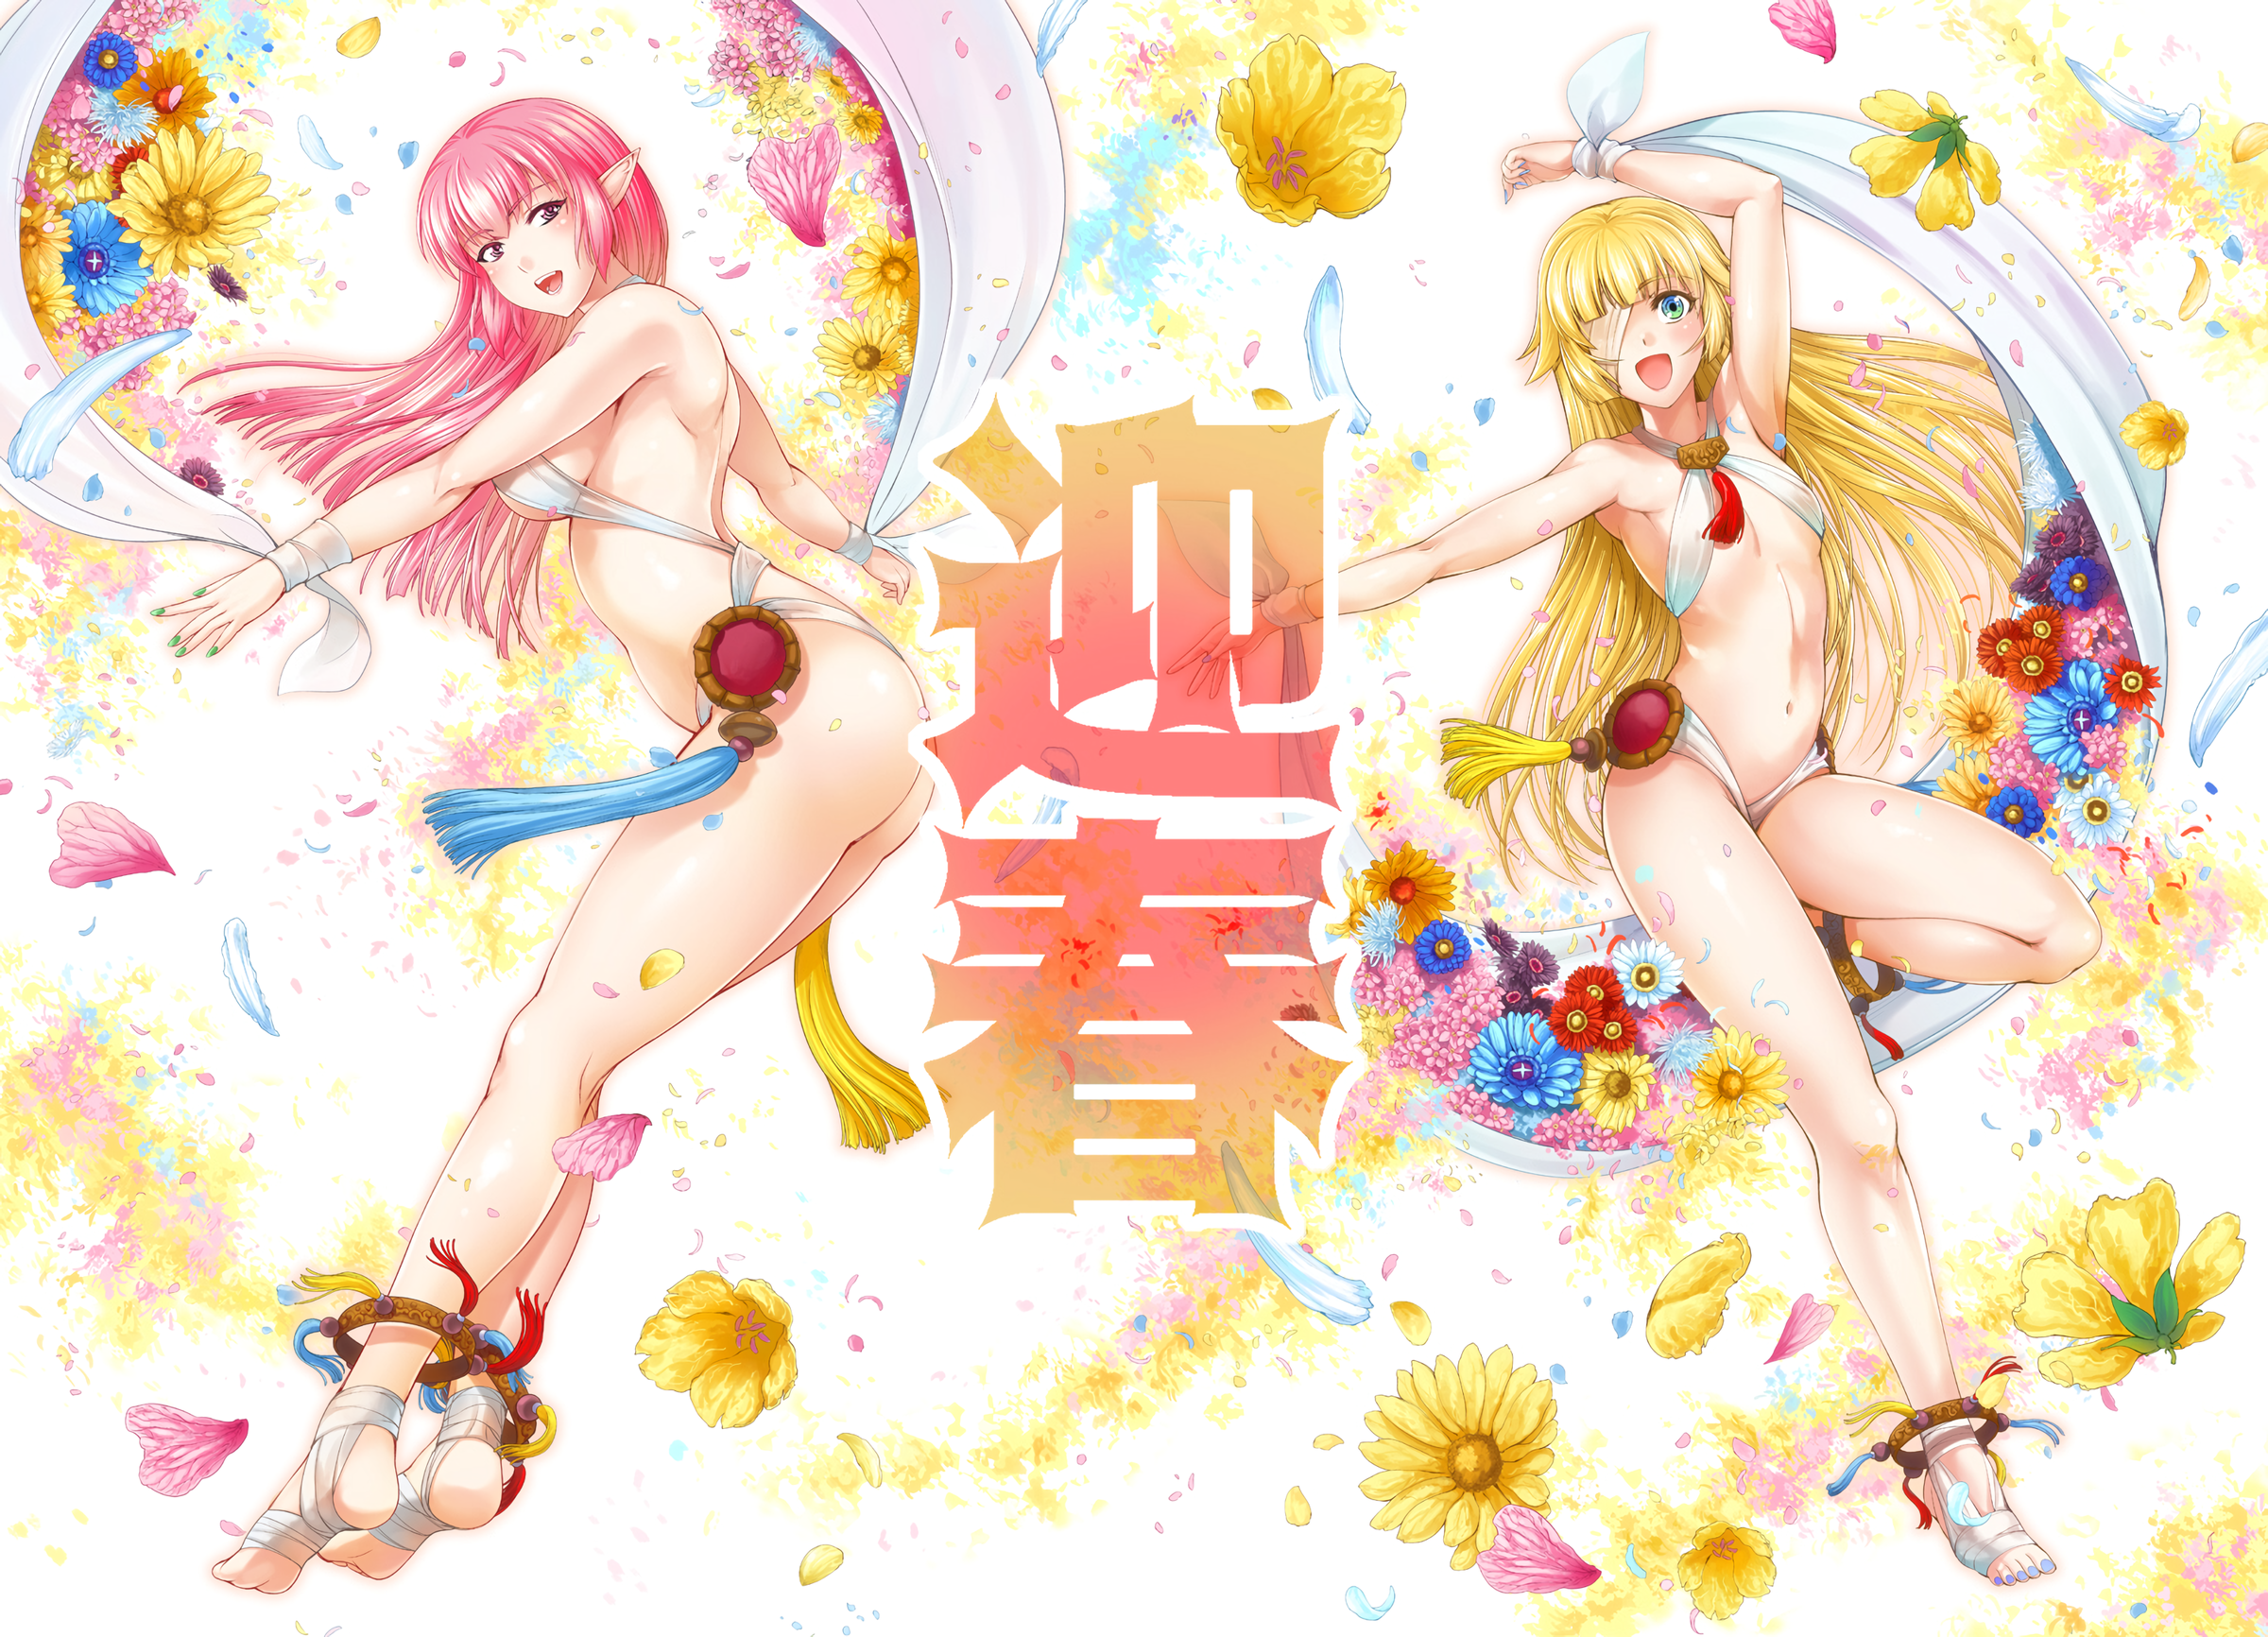 Anime 2400x1732 artwork GEN anime anime girls ass belly pink hair blonde pointy ears two women looking at viewer legs long hair flowers plants open mouth Pixiv bikini